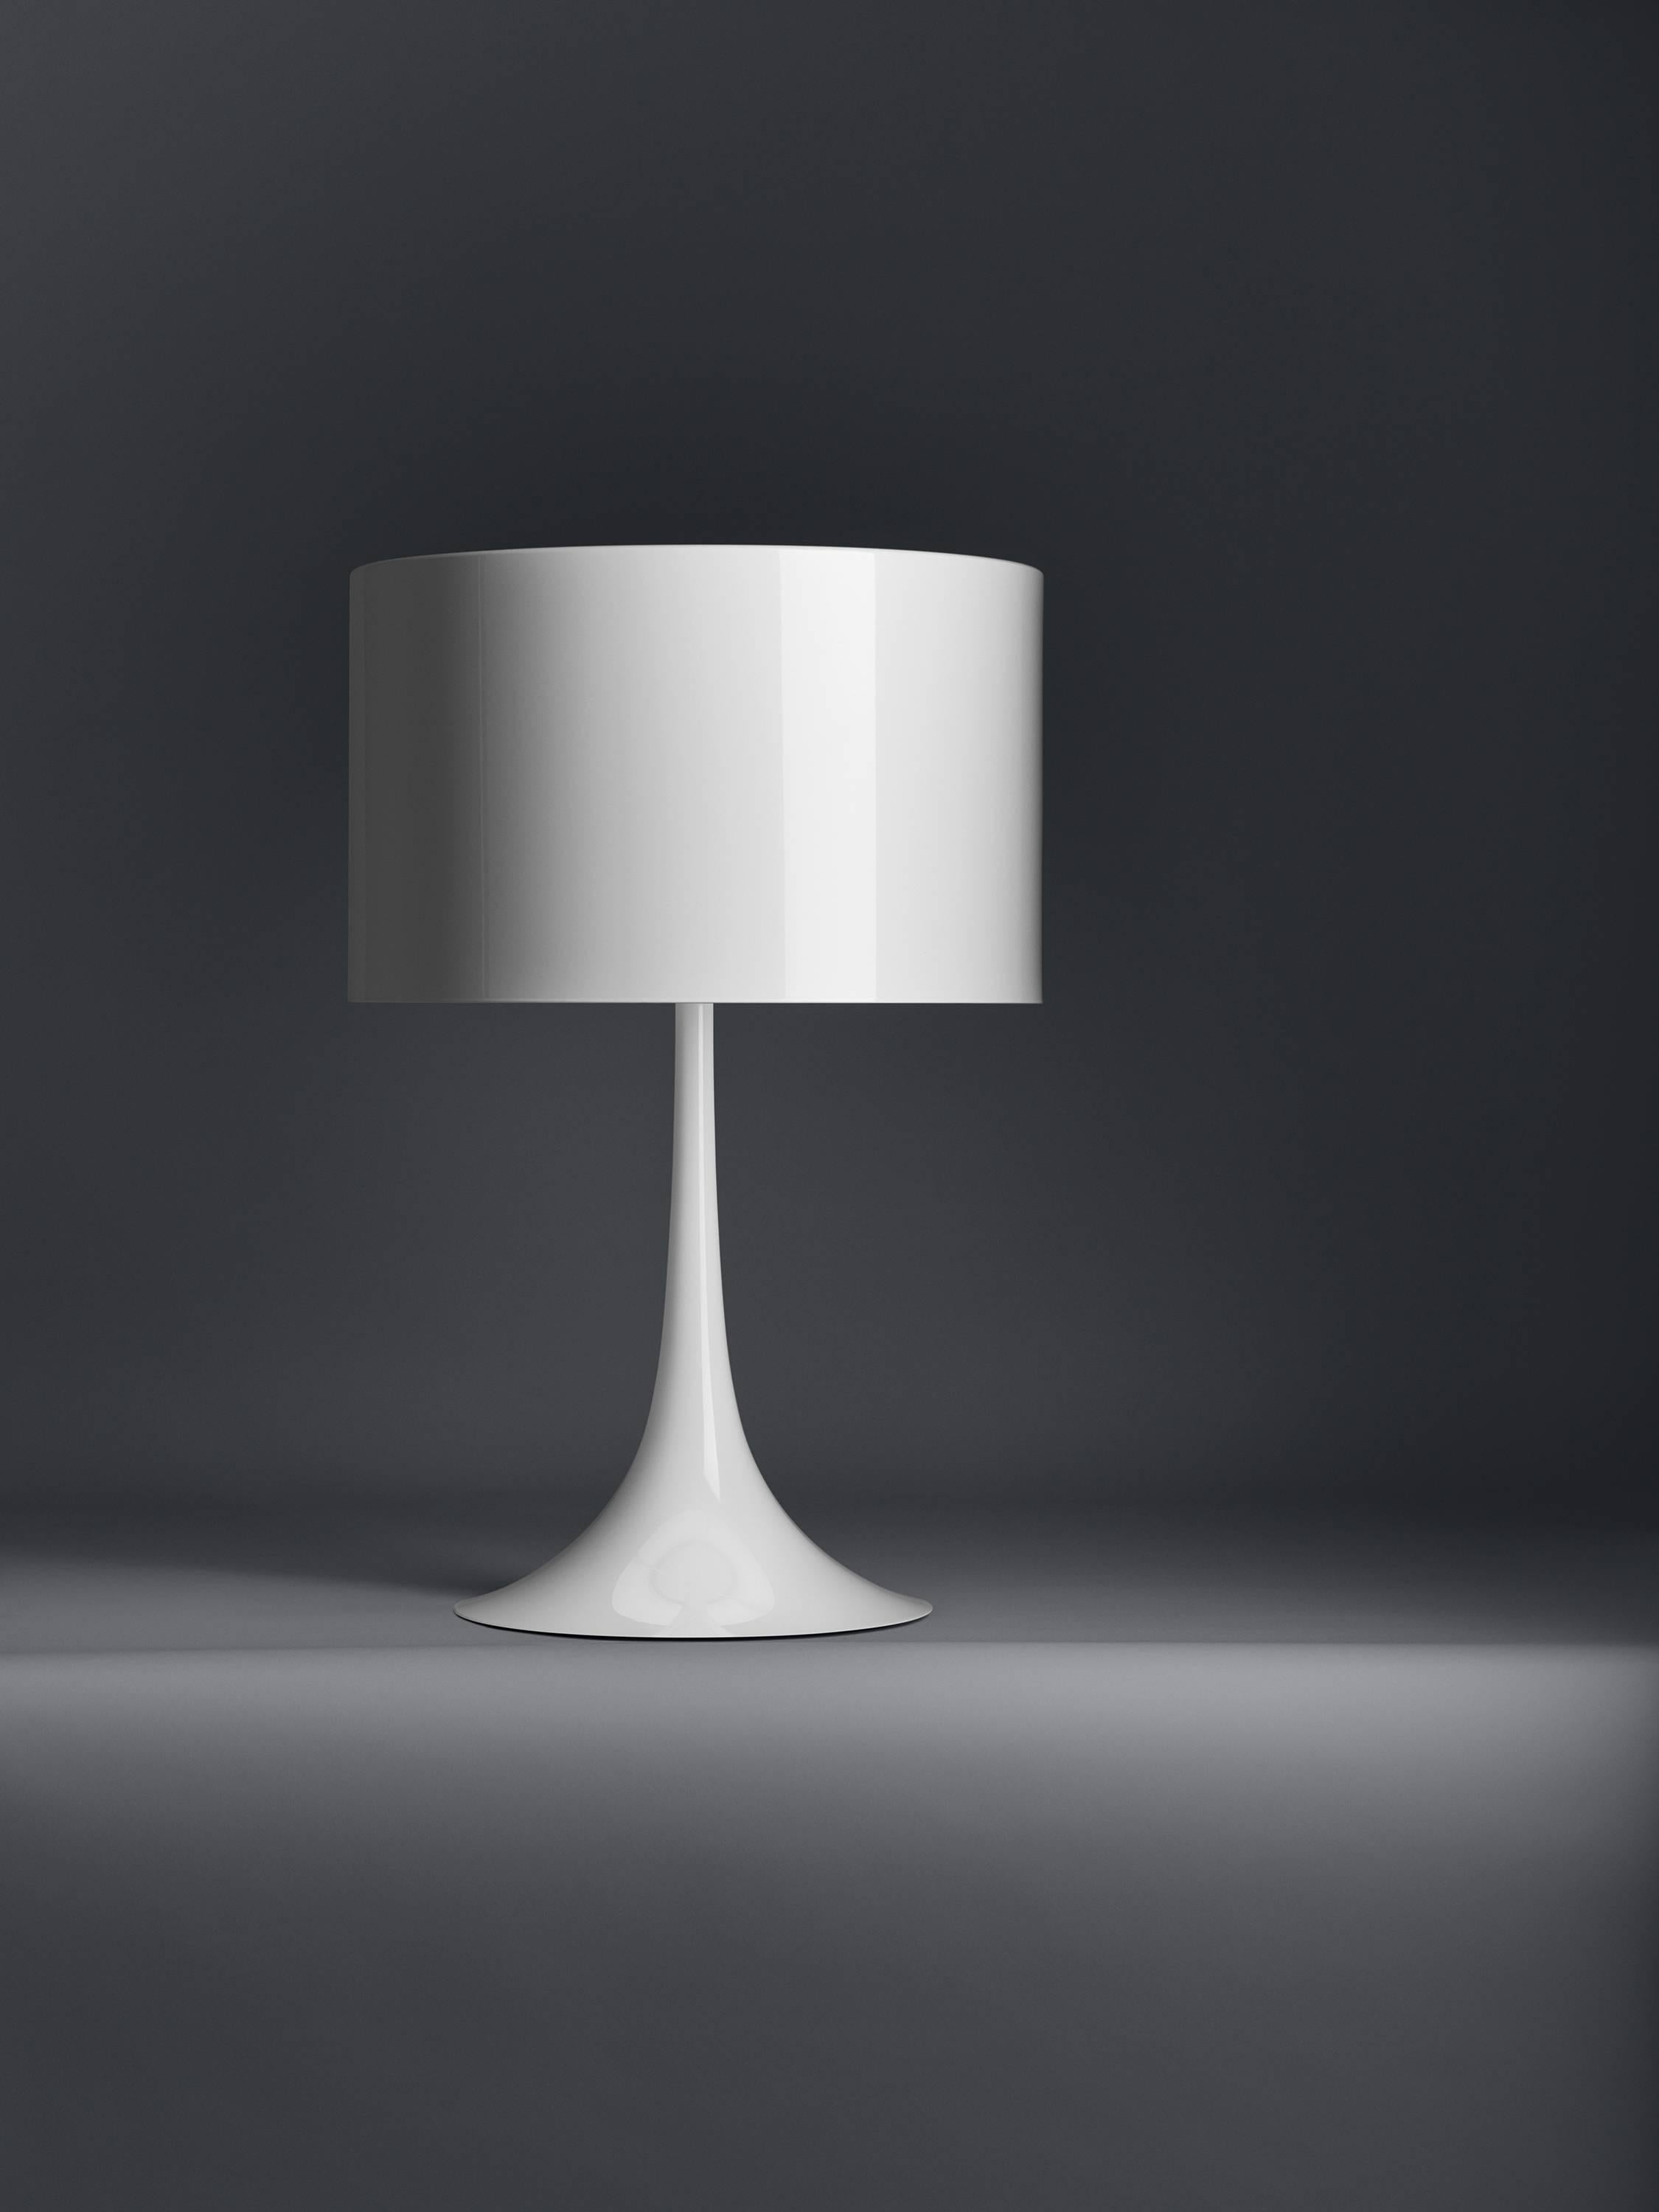 Designed by Sebastian Wrong in 2003, the Spun Light-T table lamp reflects the best of modern manufacturing technology combined with elegance, craftsmanship, and dynamic fluid aesthetics.

Its main body has a spun metal frame and diffuser. The